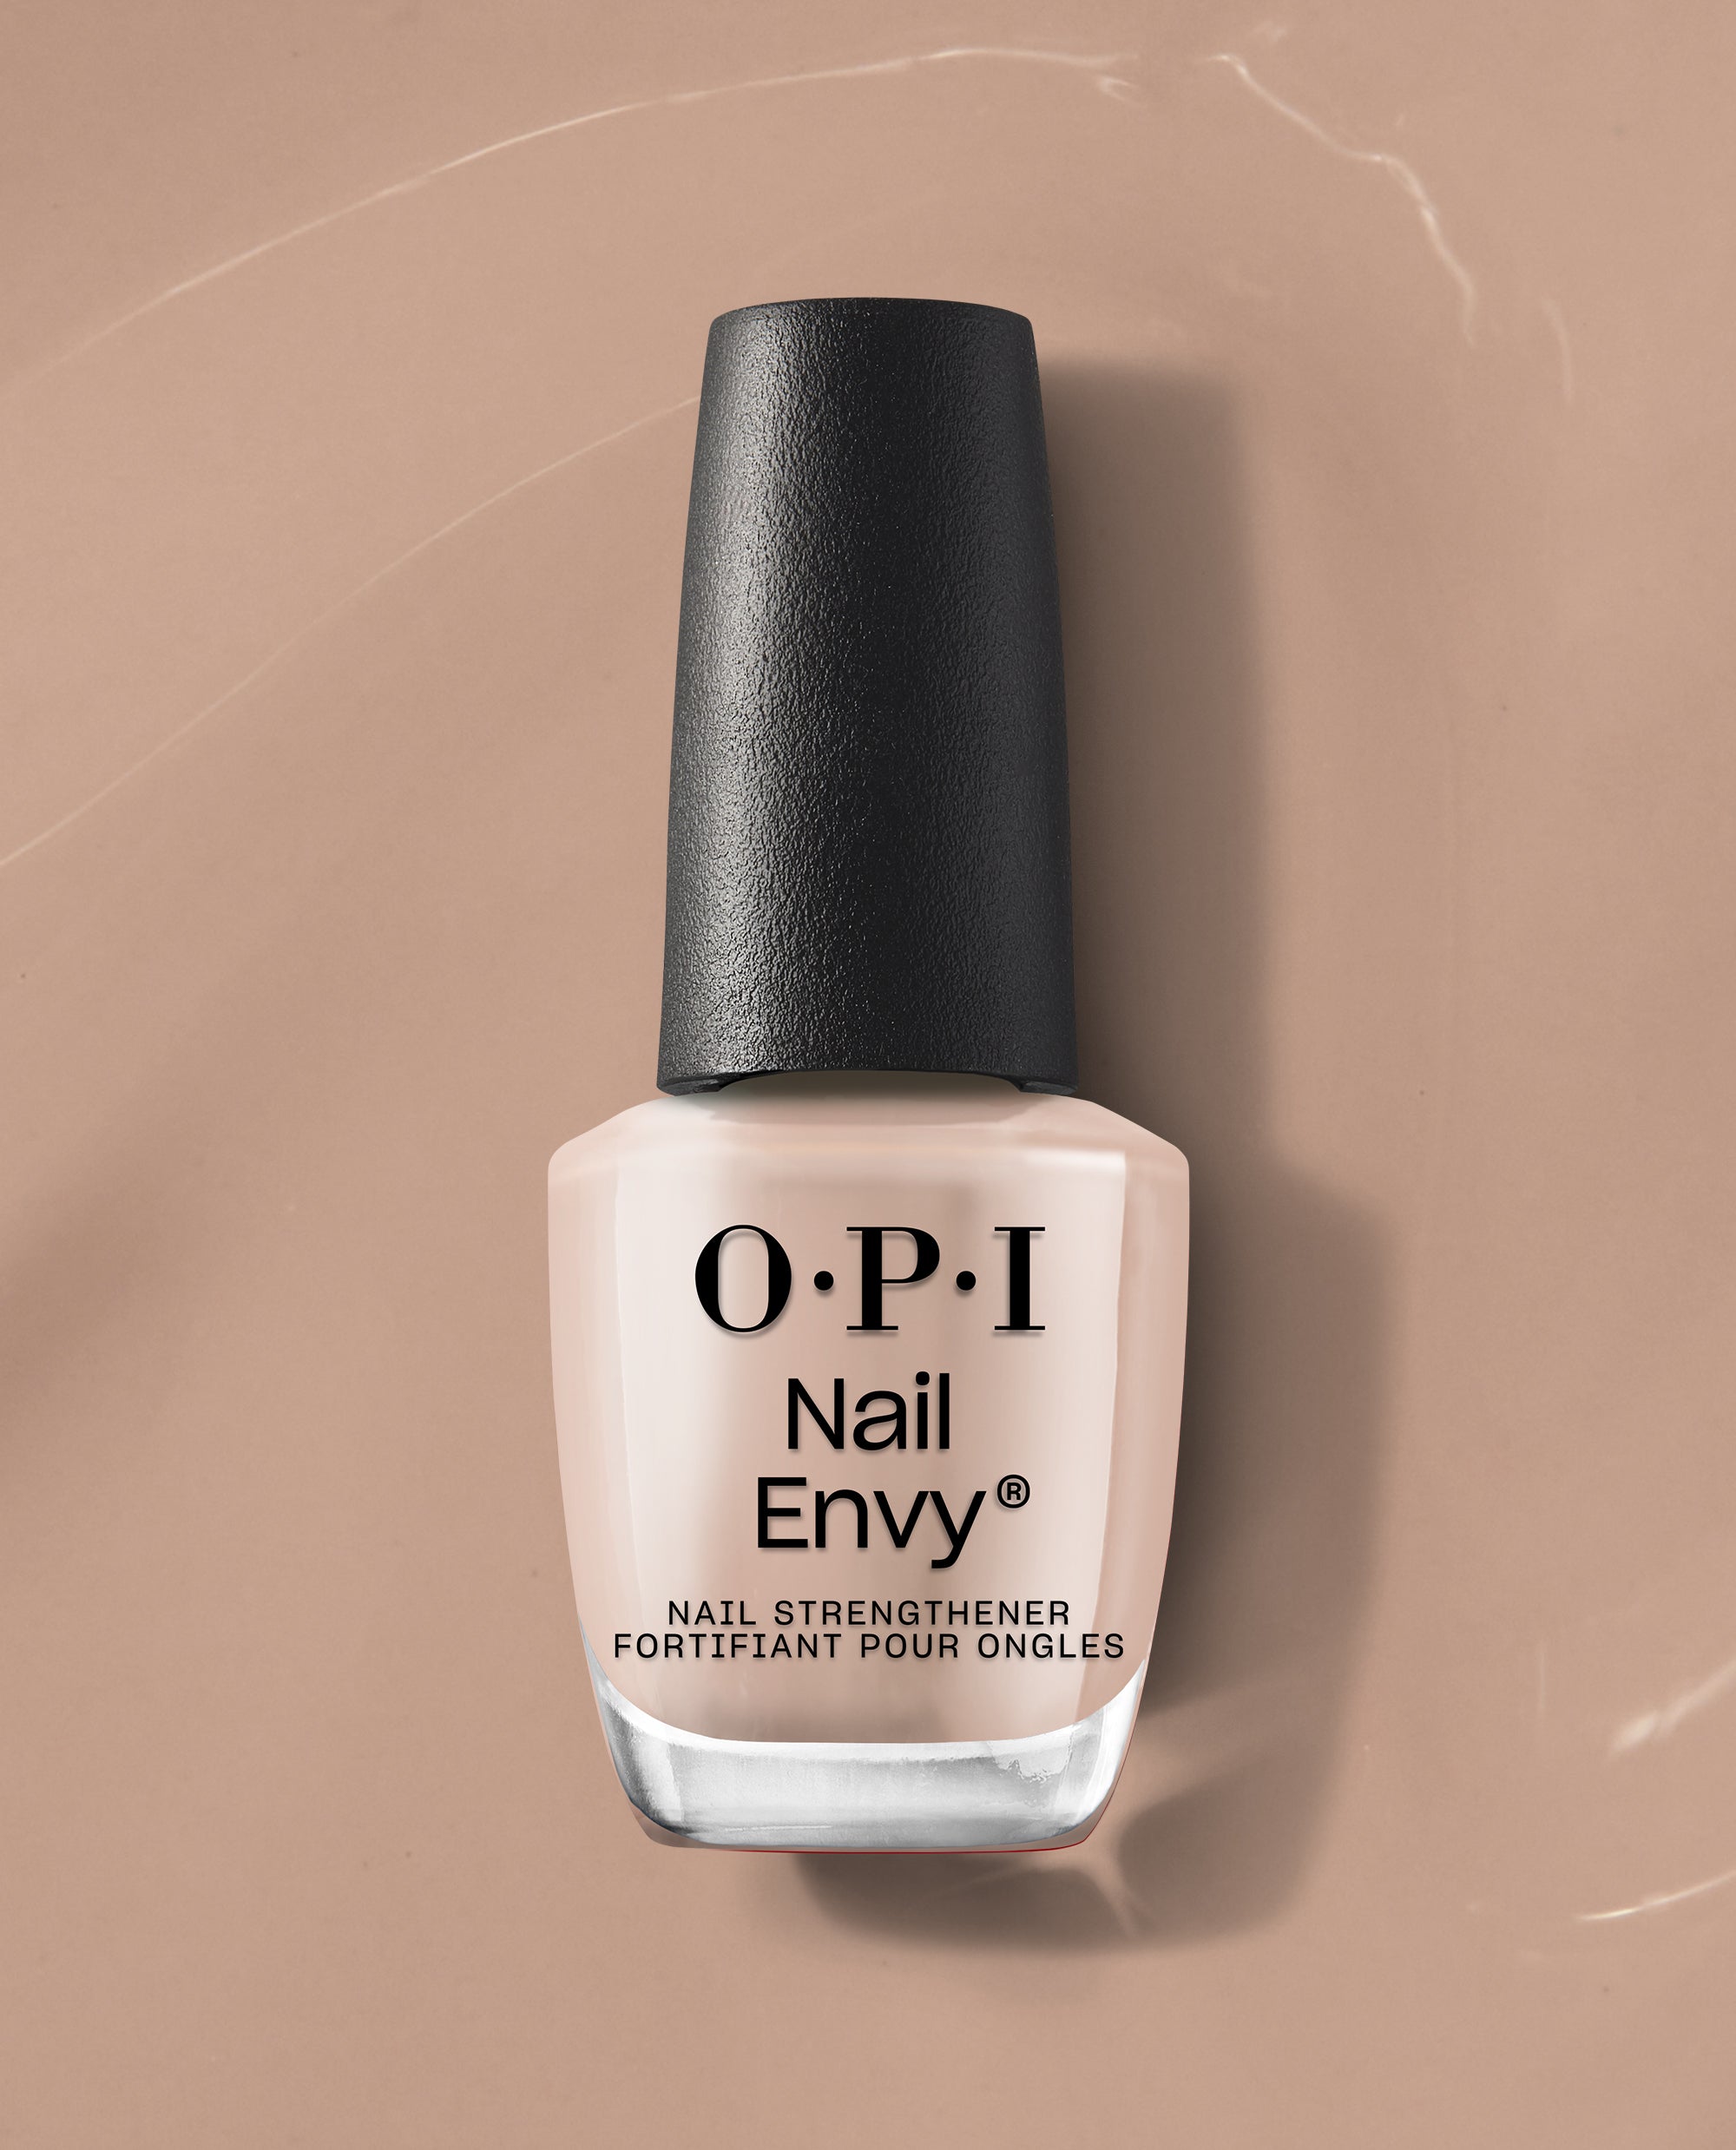 OPI Nail Envy Double Nude-y Nail Strengthener Treatments & Strengtheners Treatments & Strengtheners